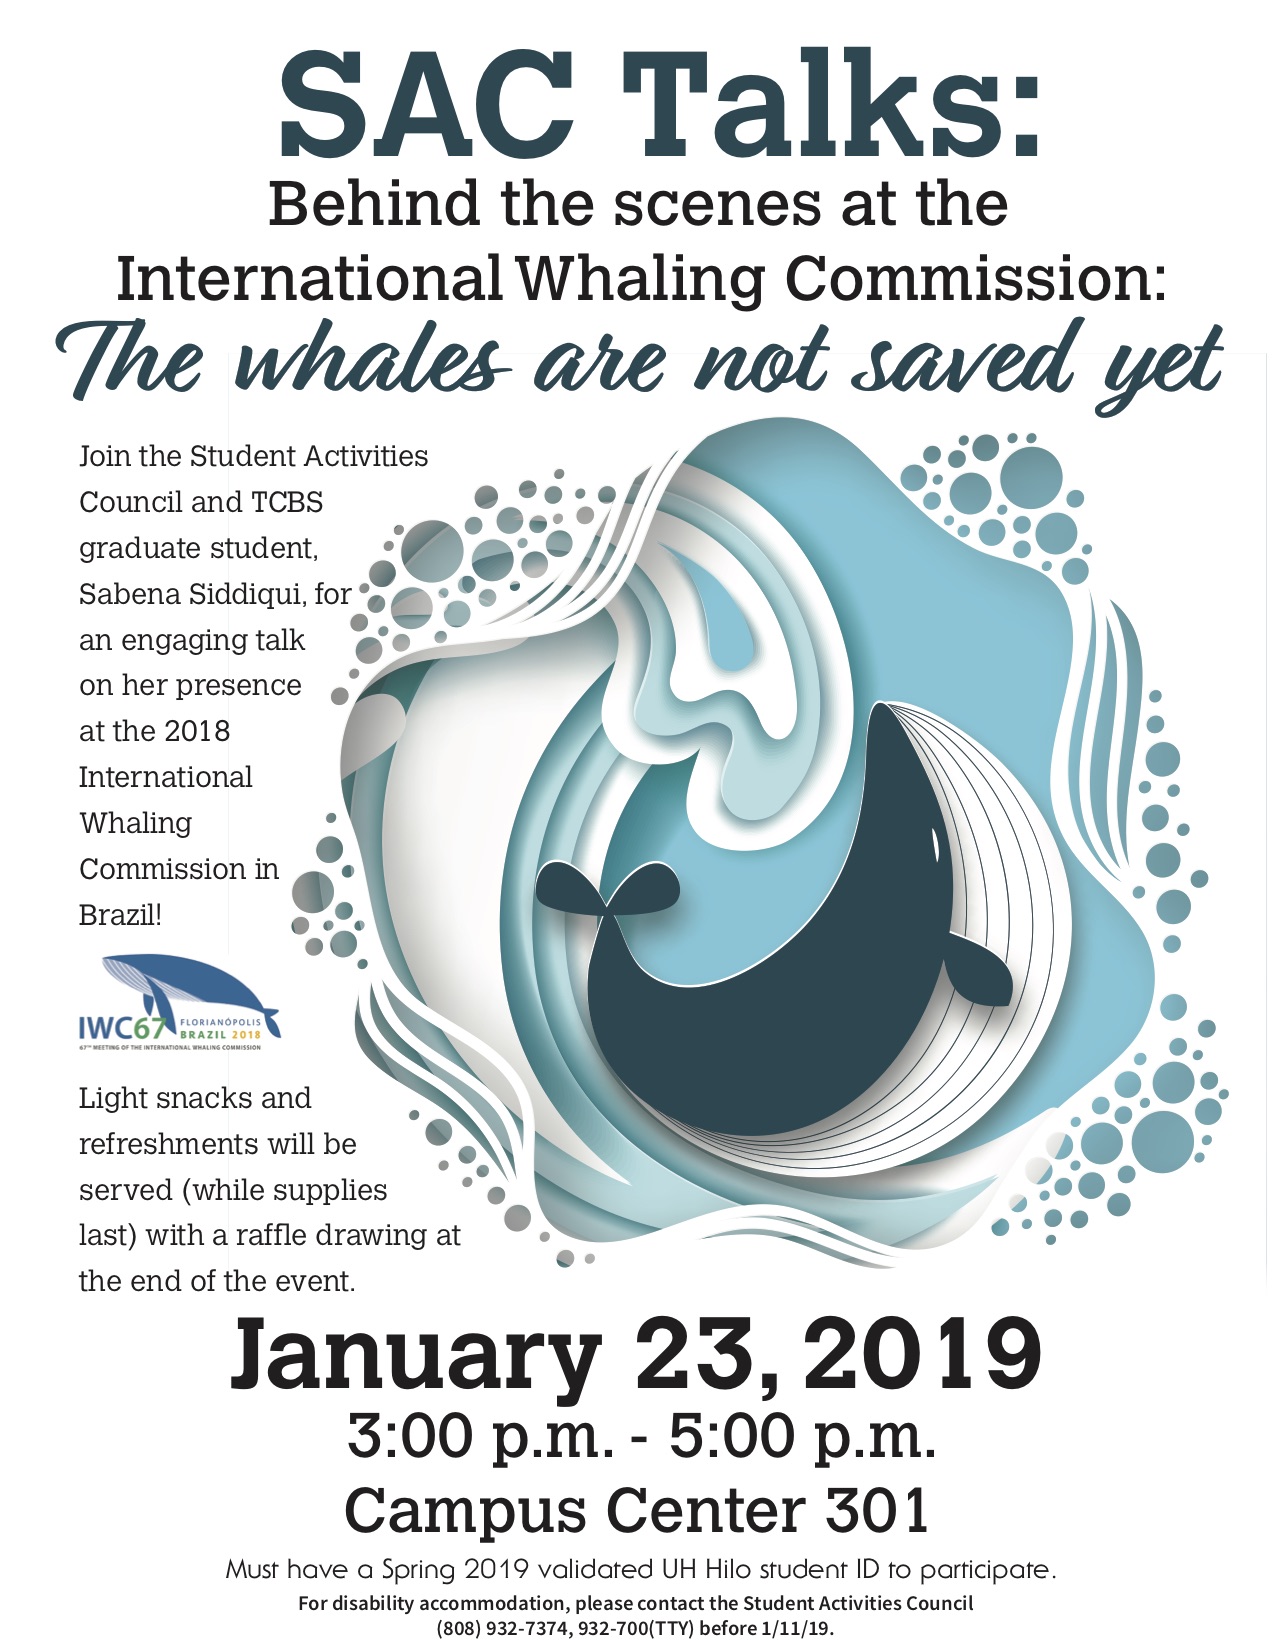 SAC talks: Behind the scenes at the International Whaling Commission: The whales are not saved yet. Join the Student Activities Council and TCBES graduate student, Sabena Siddiqui, for an engaging talk on her presence at the 2018 International Commission in Brazil. Light snacks and refreshments will be served (while supplies last) with a raffle drawing at the end of the event. January 23, 2019 from 3pm - 5pm campus center 301. Must have a spring 2019 validated UH Hilo student ID to participate